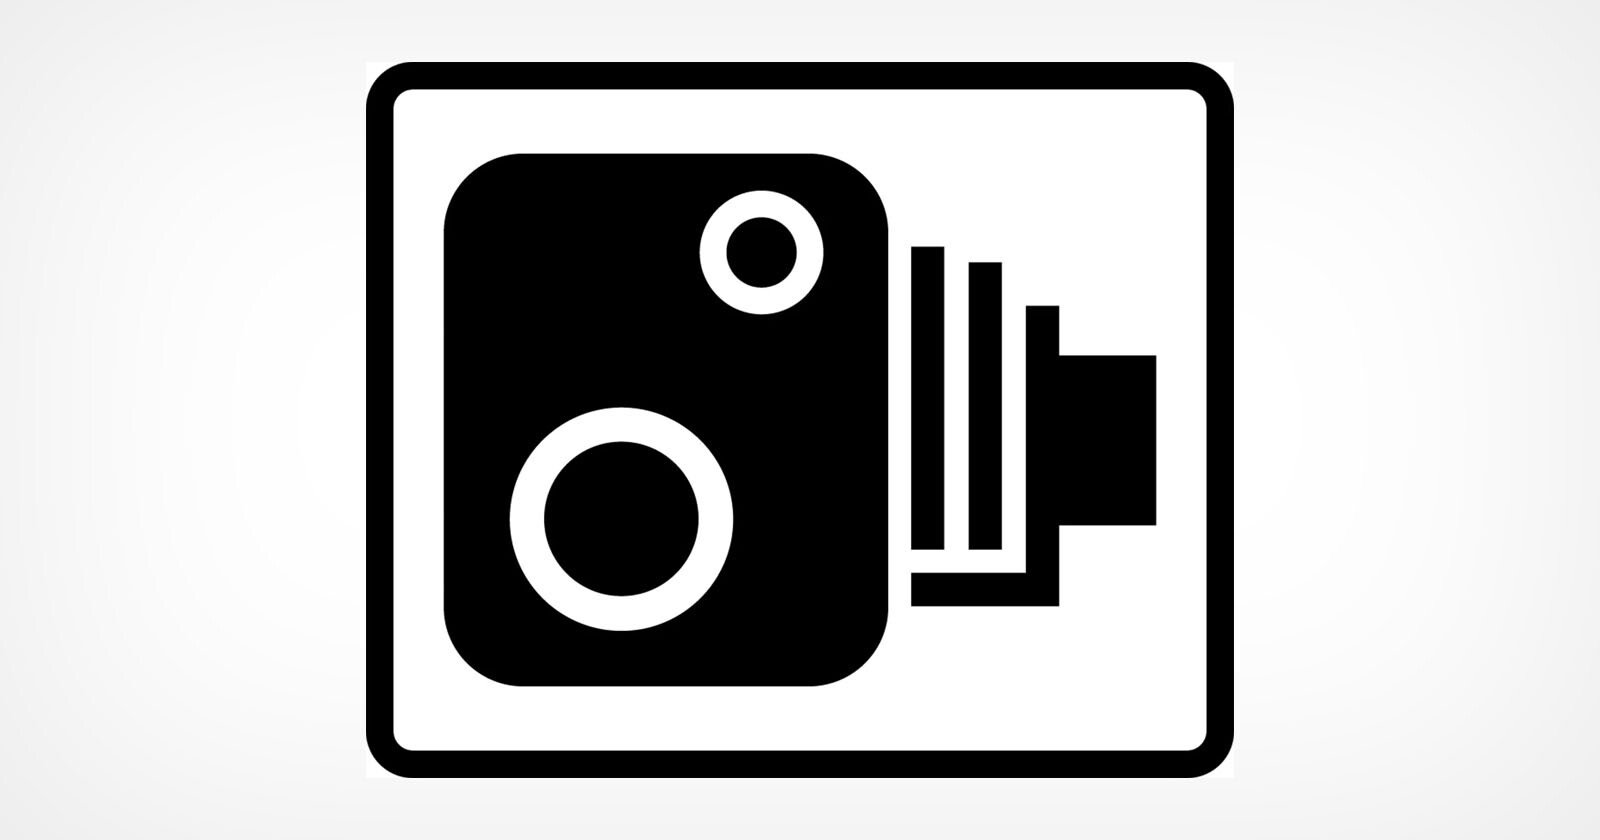 Yes, the UK Speed Camera Icon Really Is a 19th-Century Camera